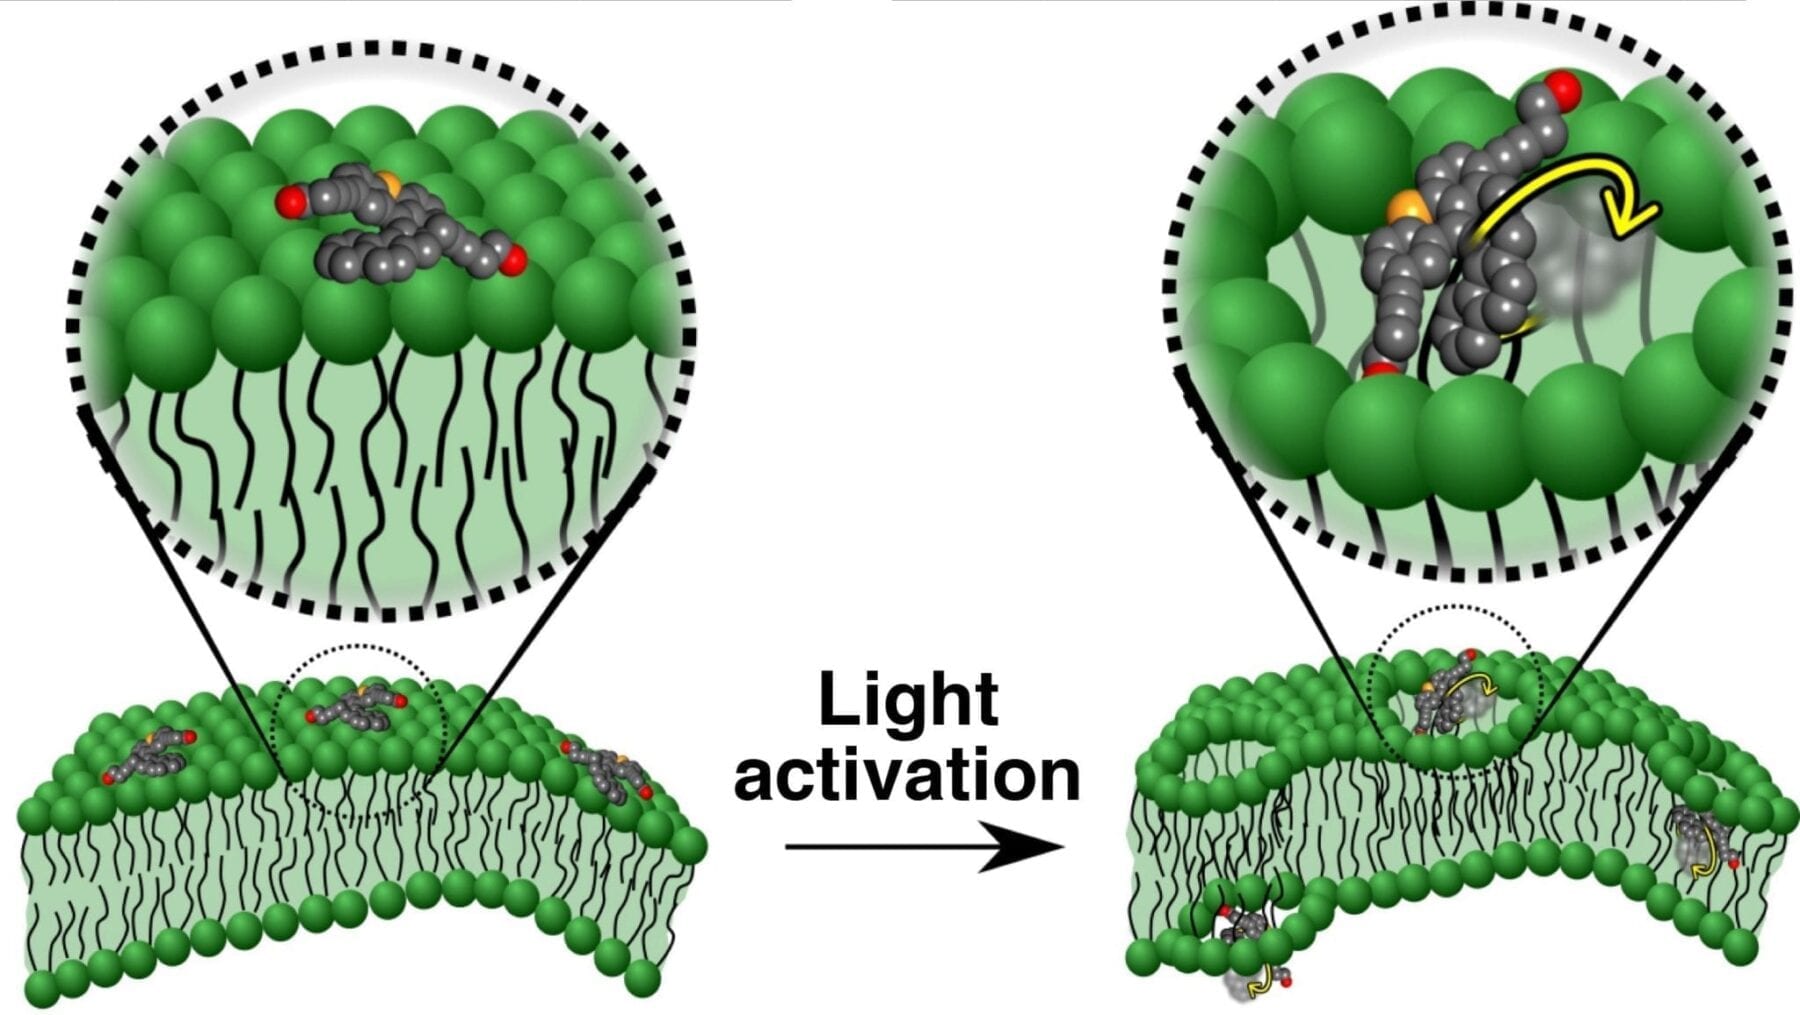 Nanomachine motorized molecules can drill into cells to deliver drugs or even kill the cell